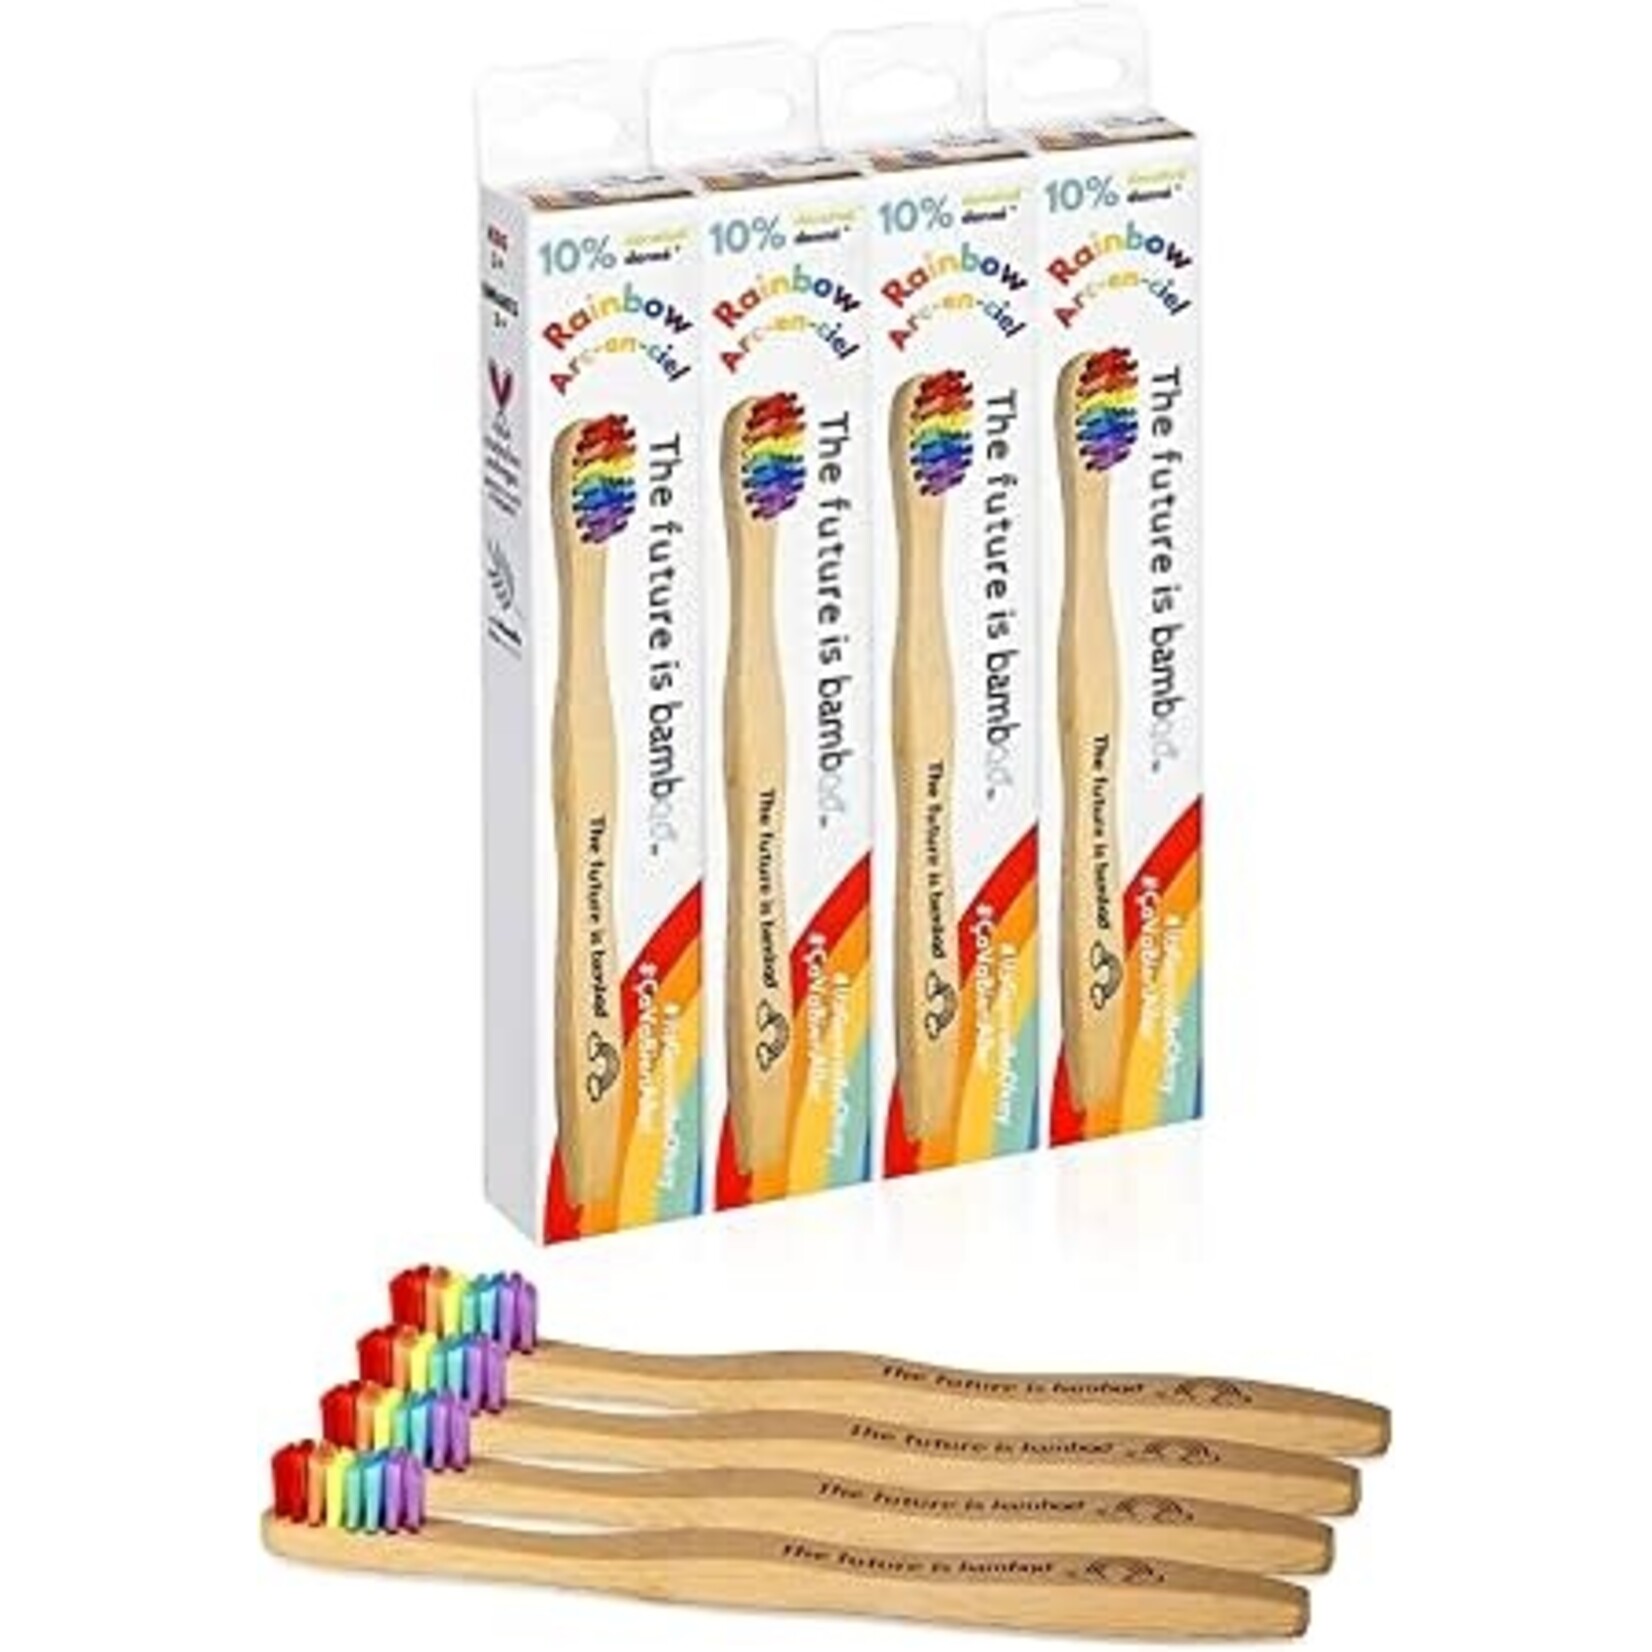 THE FUTURE OF BAMBOO - Rainbow bamboo toothbrush for kids